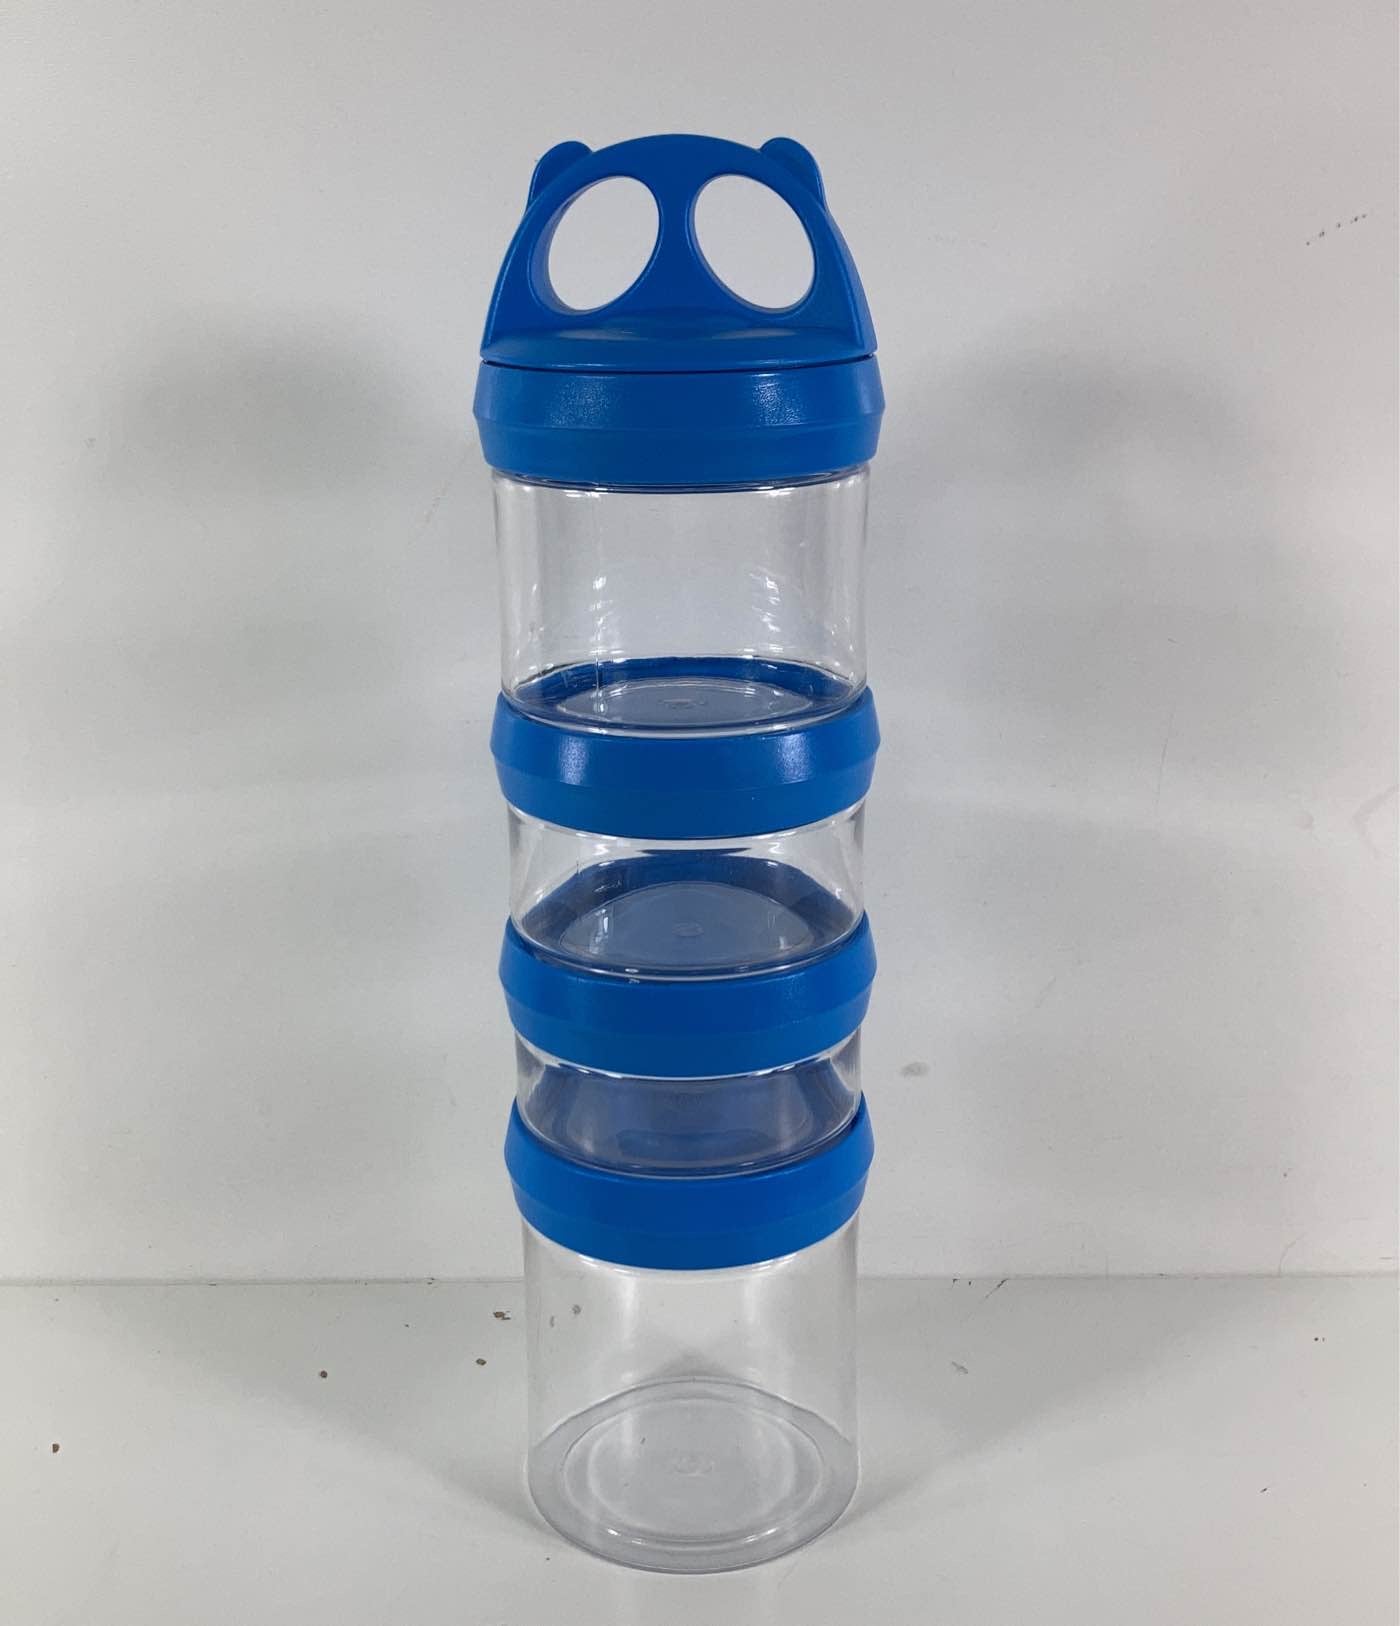 SELEWARE Portable Stackable Food Storage Containers for Snacks Formula Powder and Drinks Twist Lock System Airtight Leak-Proof BPA and Phthalate